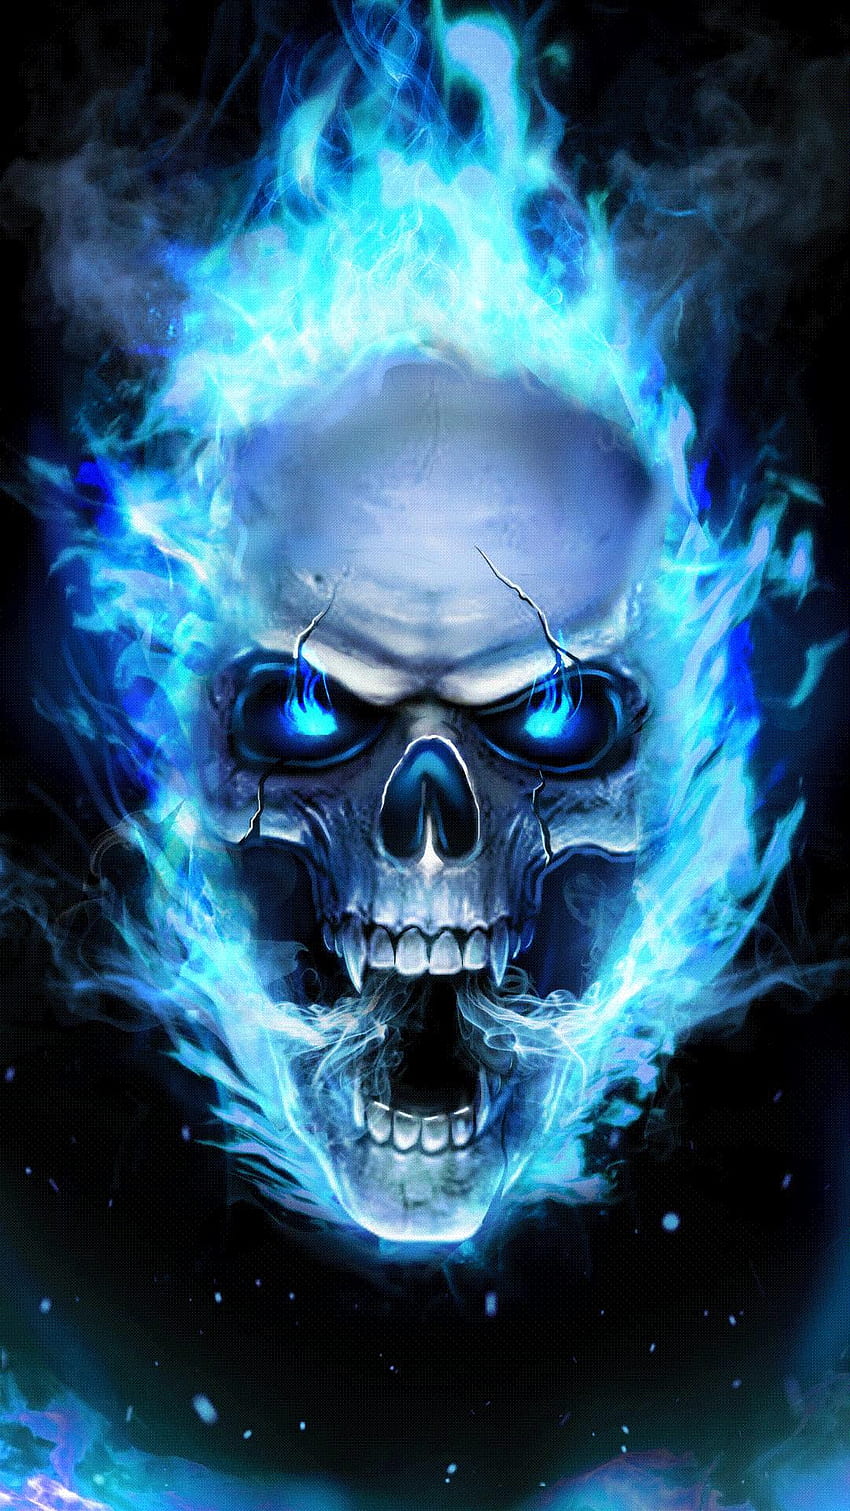 Skull Wallpaper Discover more android background Black cute Lock Screen  wallpaper httpswwwnawpiccom  Skull wallpaper Lock screen  backgrounds Wallpaper